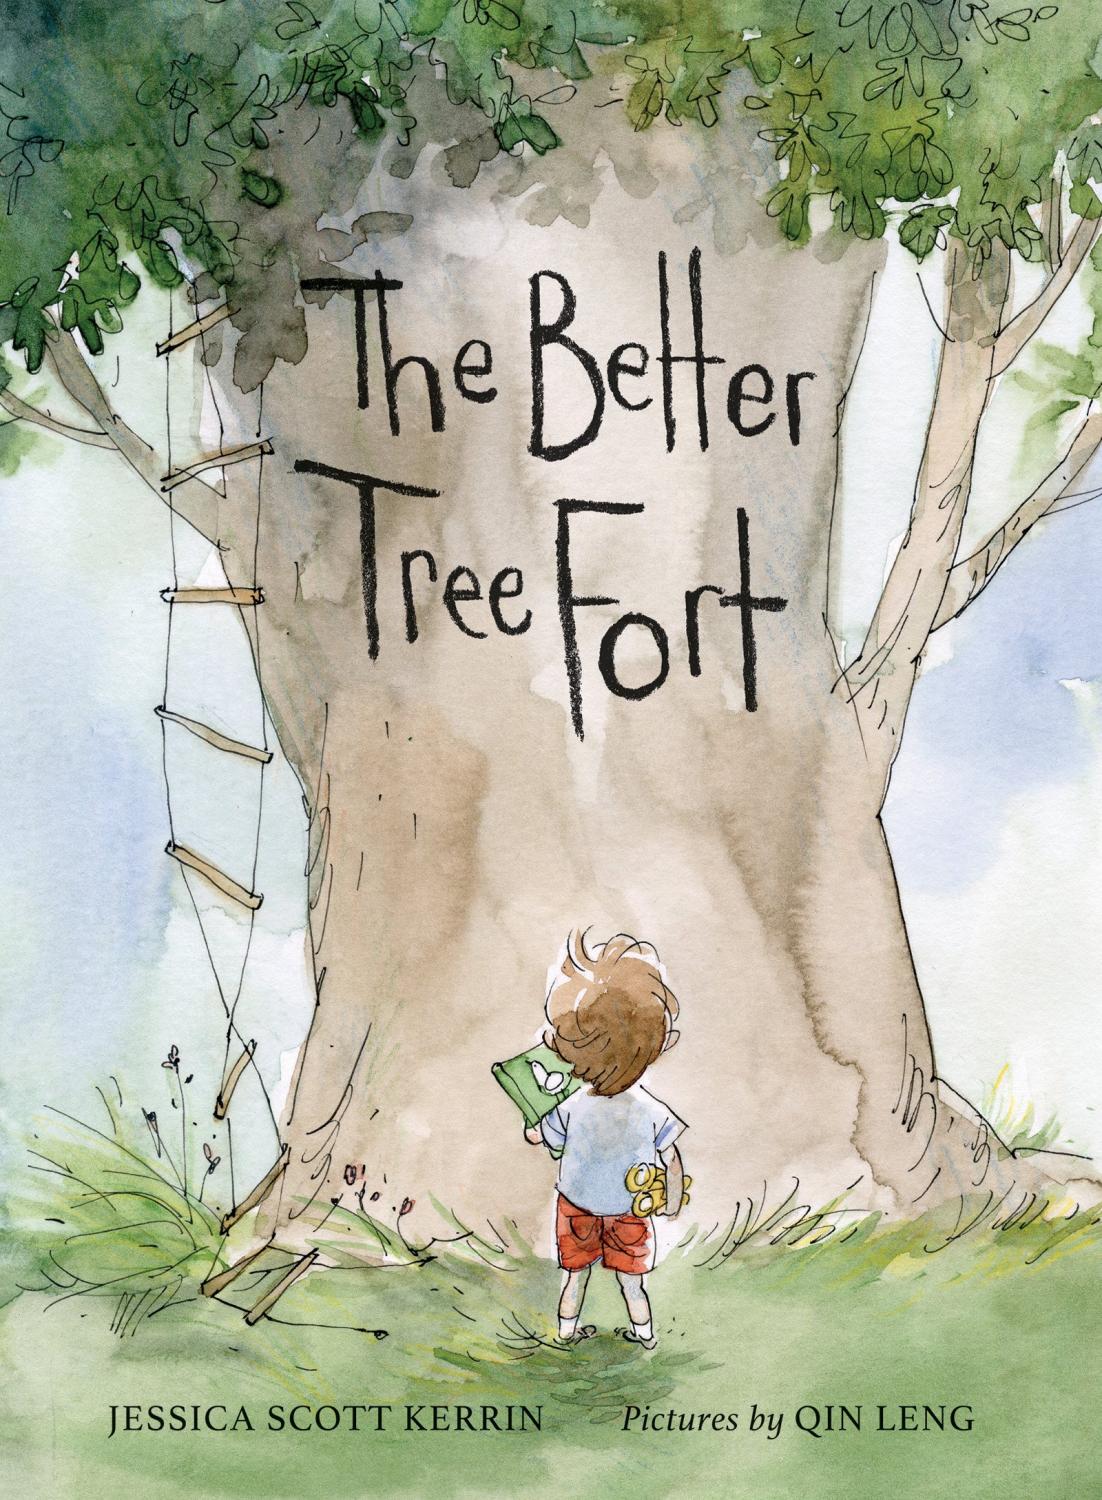 Illustration of a little boy gazing up at a large tree